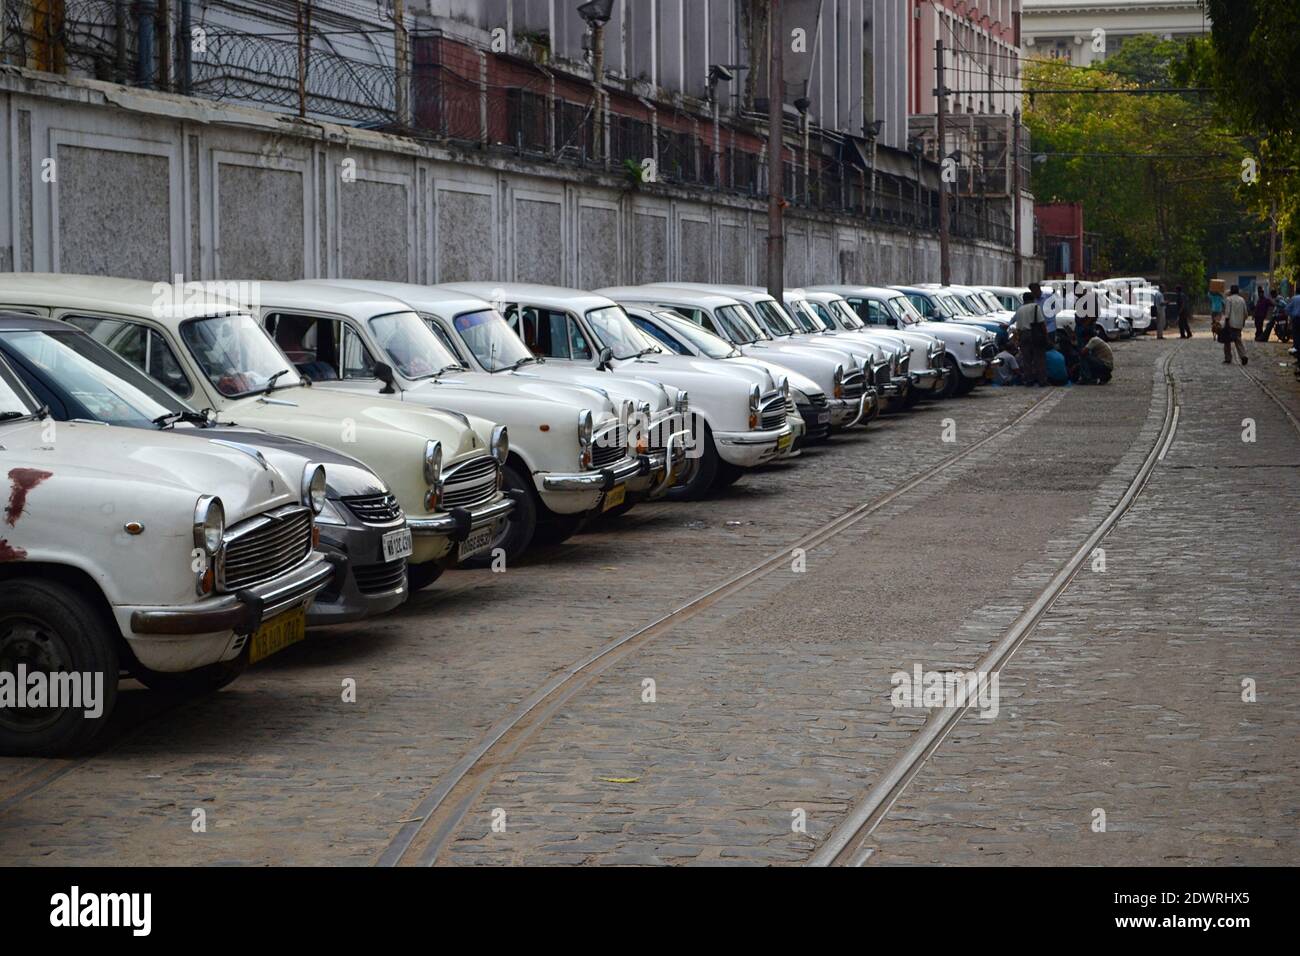 Kolkata, India - March, 2014: Row of old vintage Ambassador white cabs along tram tracks in Calcutta. Classic cars in row. Stock Photo